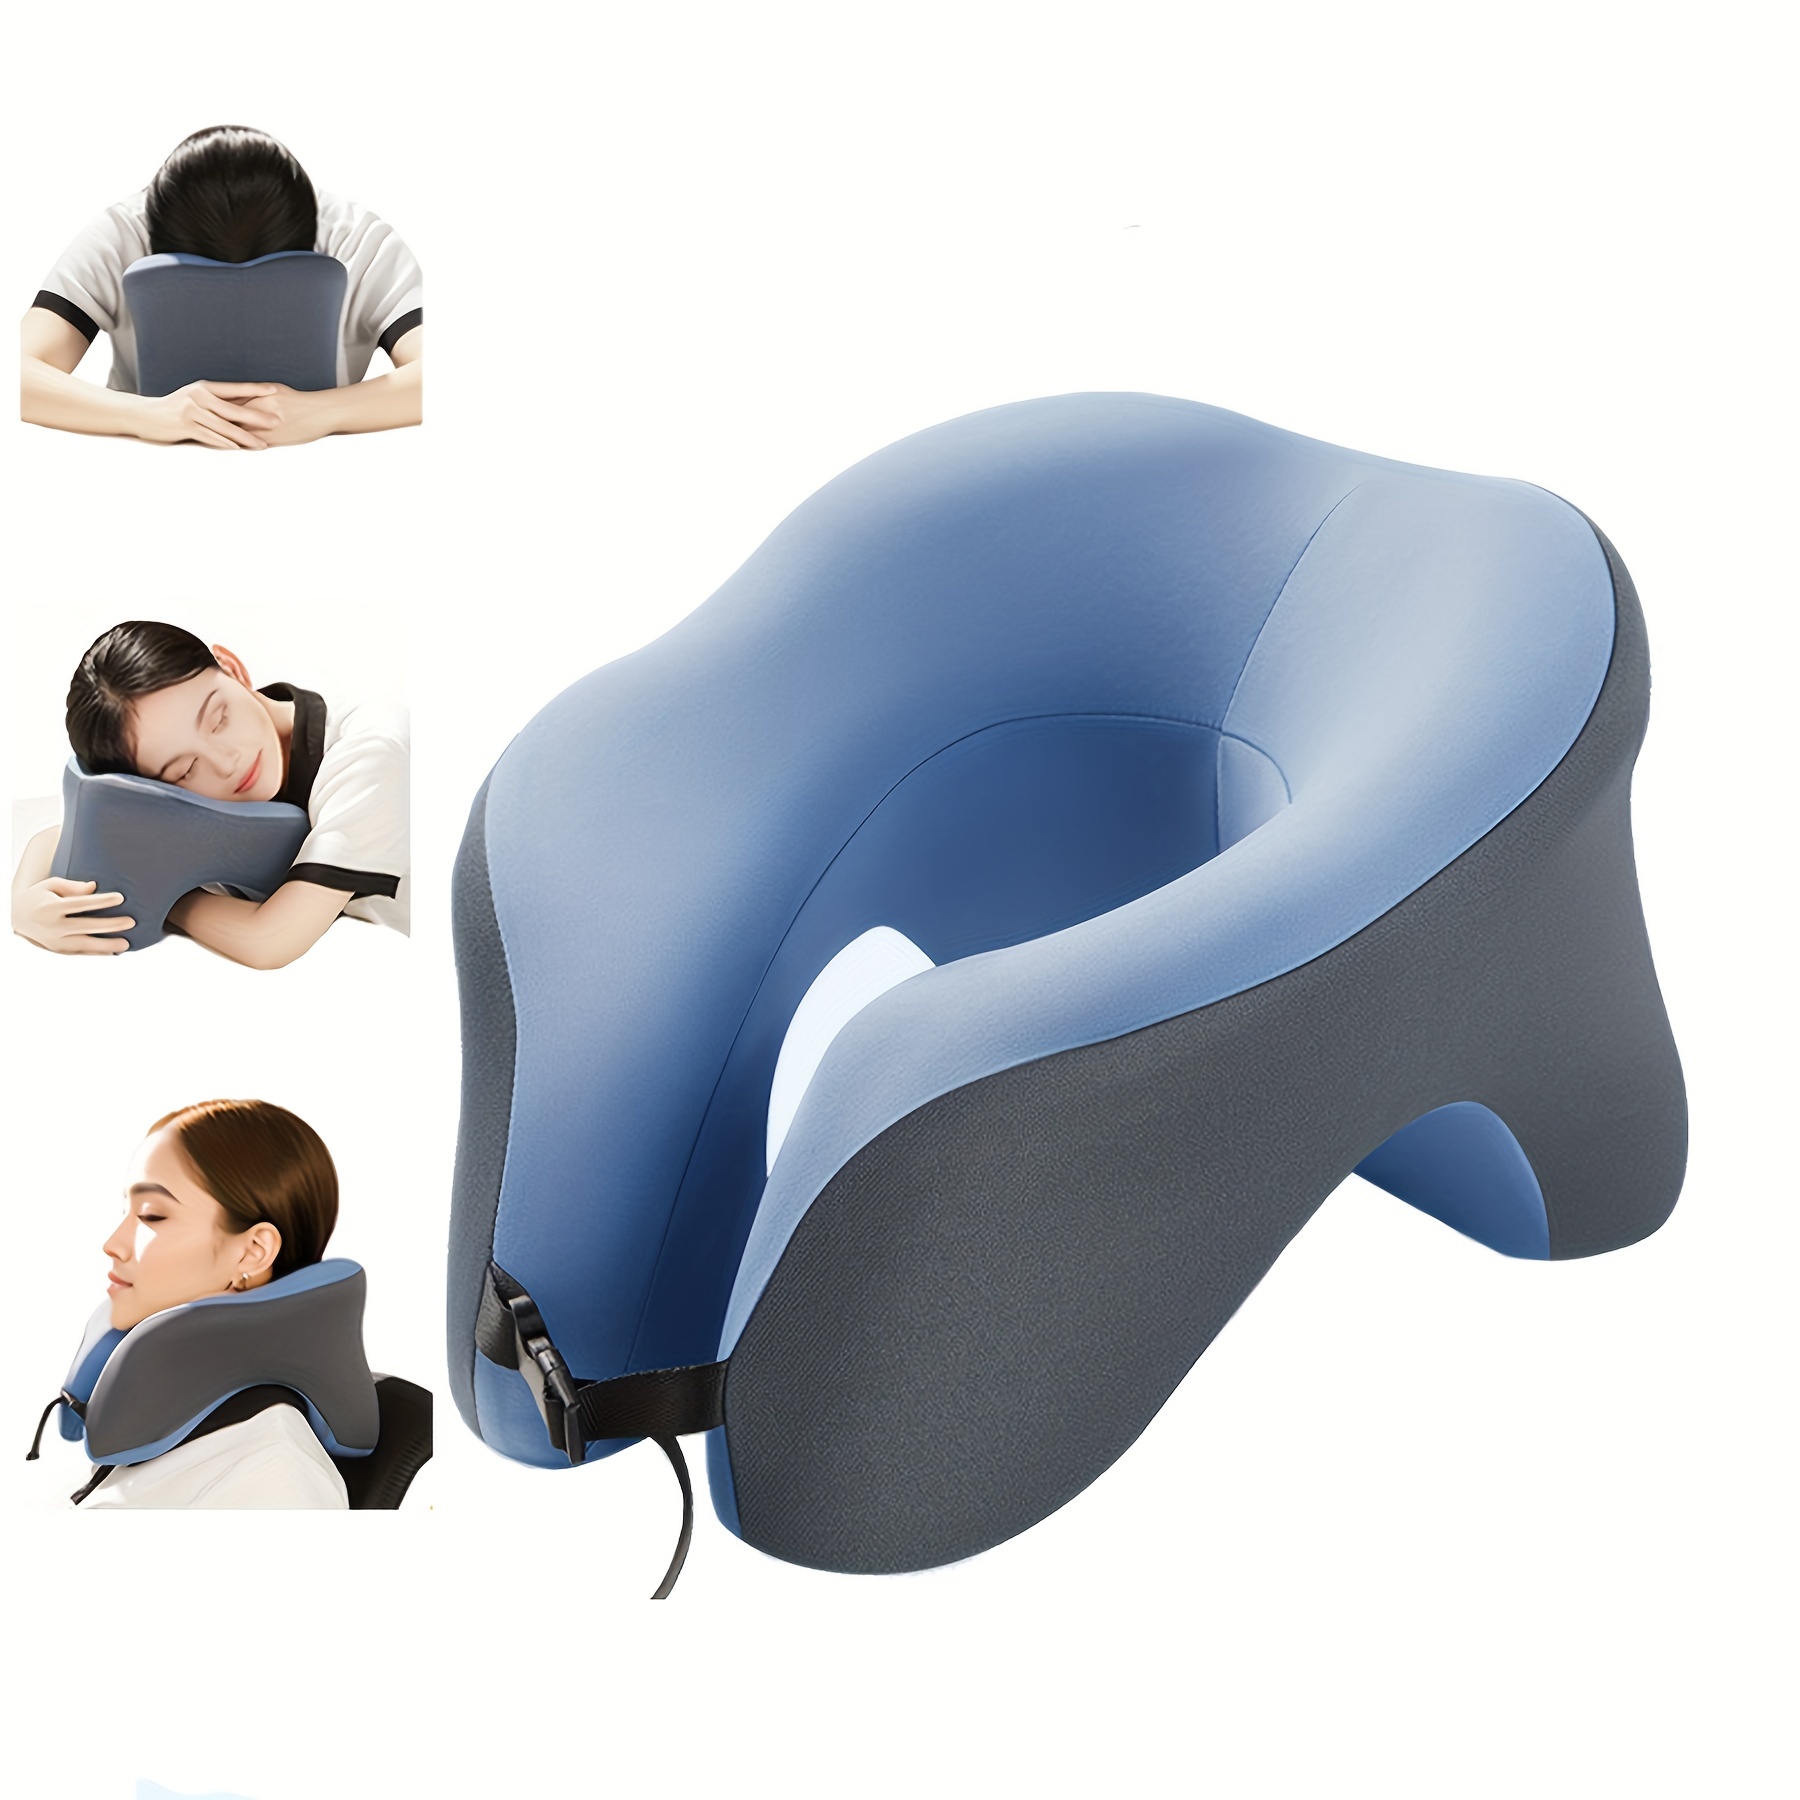  Flight Fillow Stuffable Travel Pillow, Lumbar Support for  Airplane Travel, Unqiue Gift for Traveler, Stuffable Neck Pillow for Travel,  Airplane Lumbar Support Pillow (Black) : Home & Kitchen